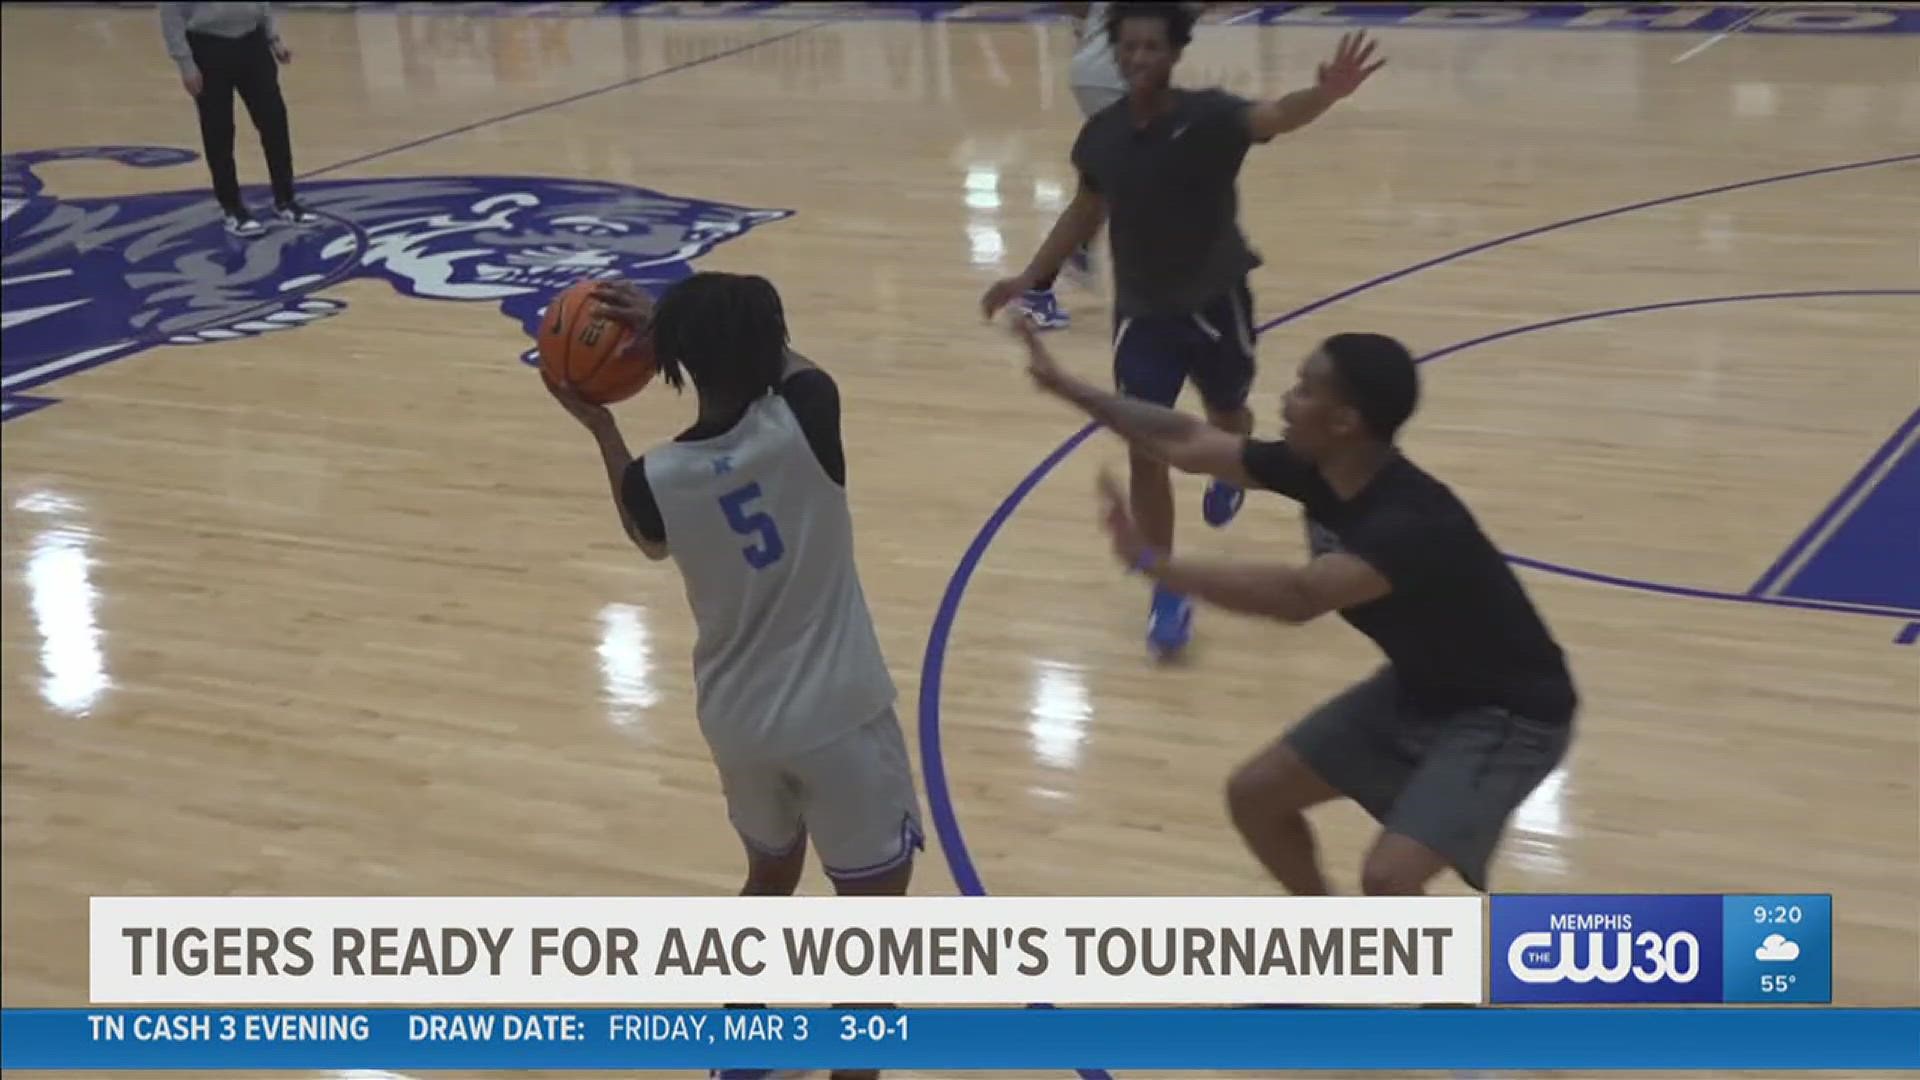 Tigers' head coach Katrina Merriweather shares expectations for her team heading into the AAC Women's Tournament on Tuesday.